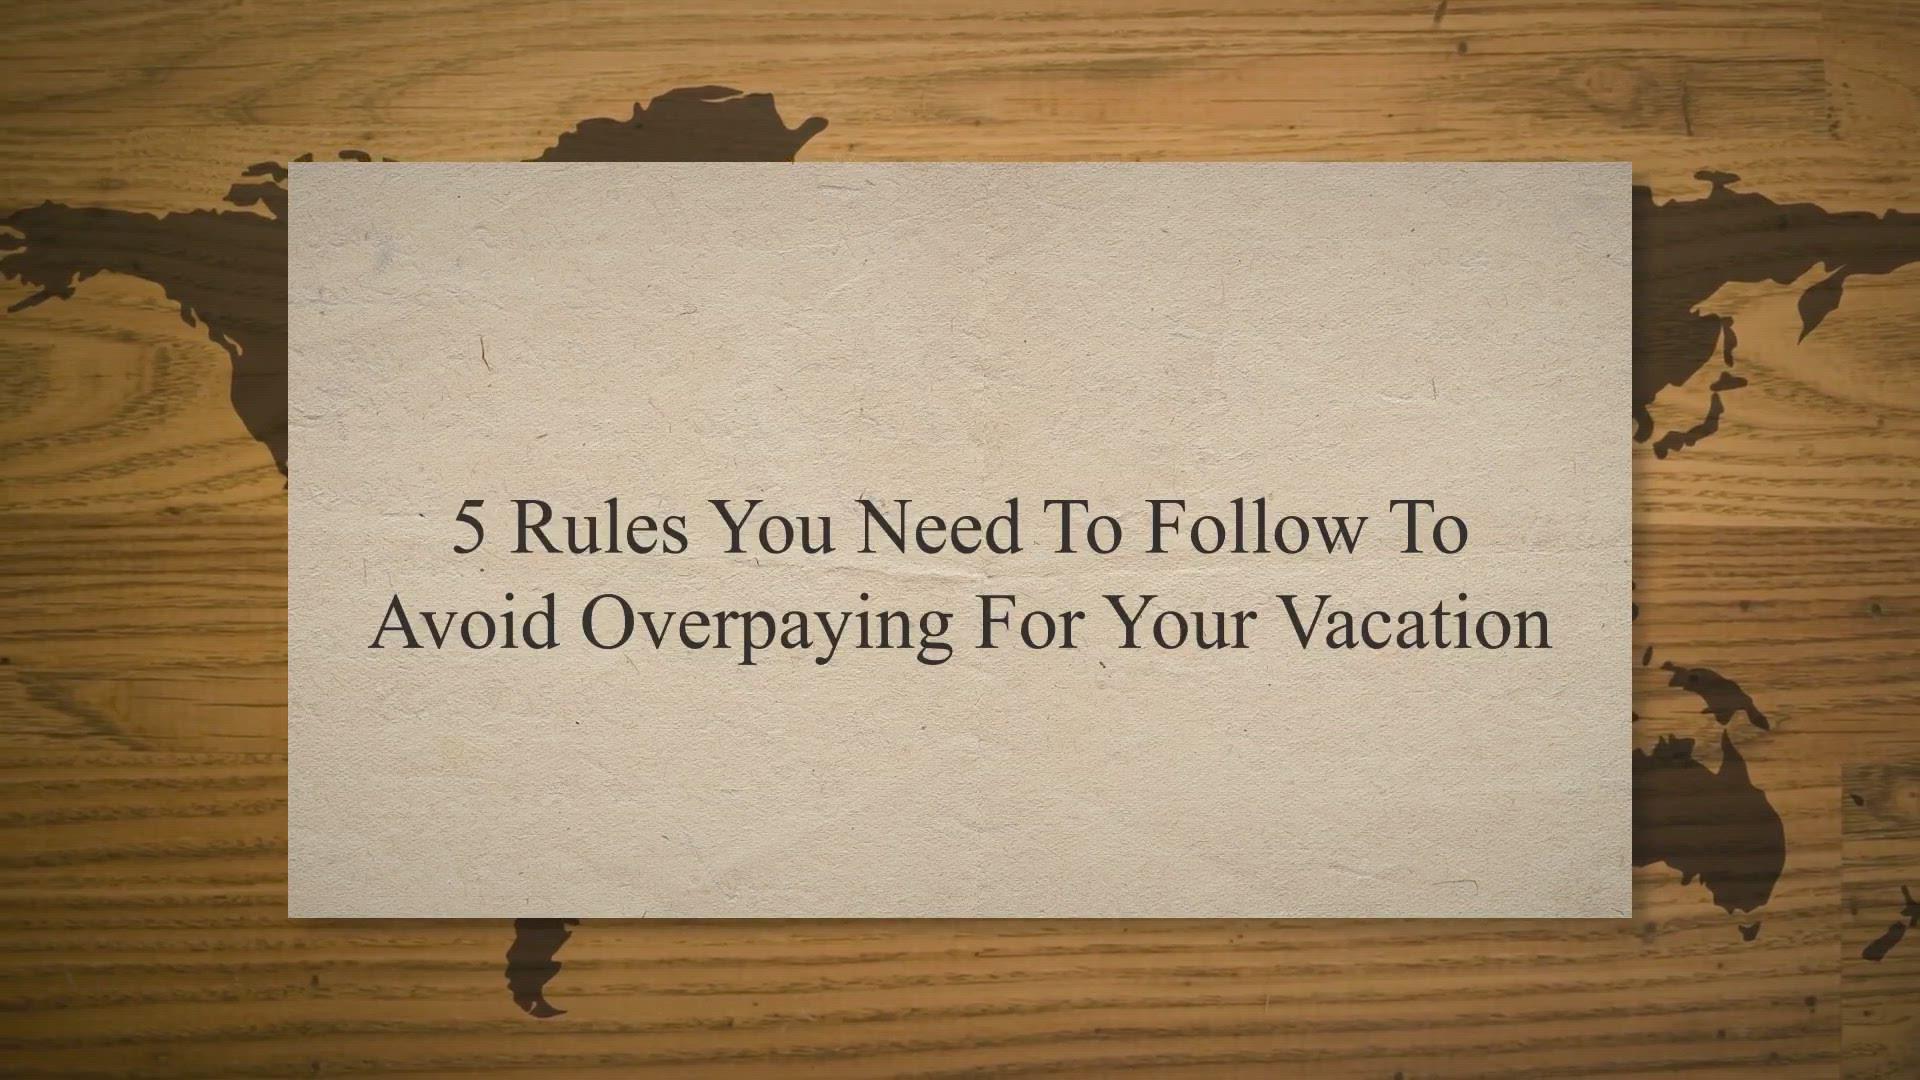 'Video thumbnail for 5 Rules You Need To Follow To Avoid Overpaying For Your Vacation'